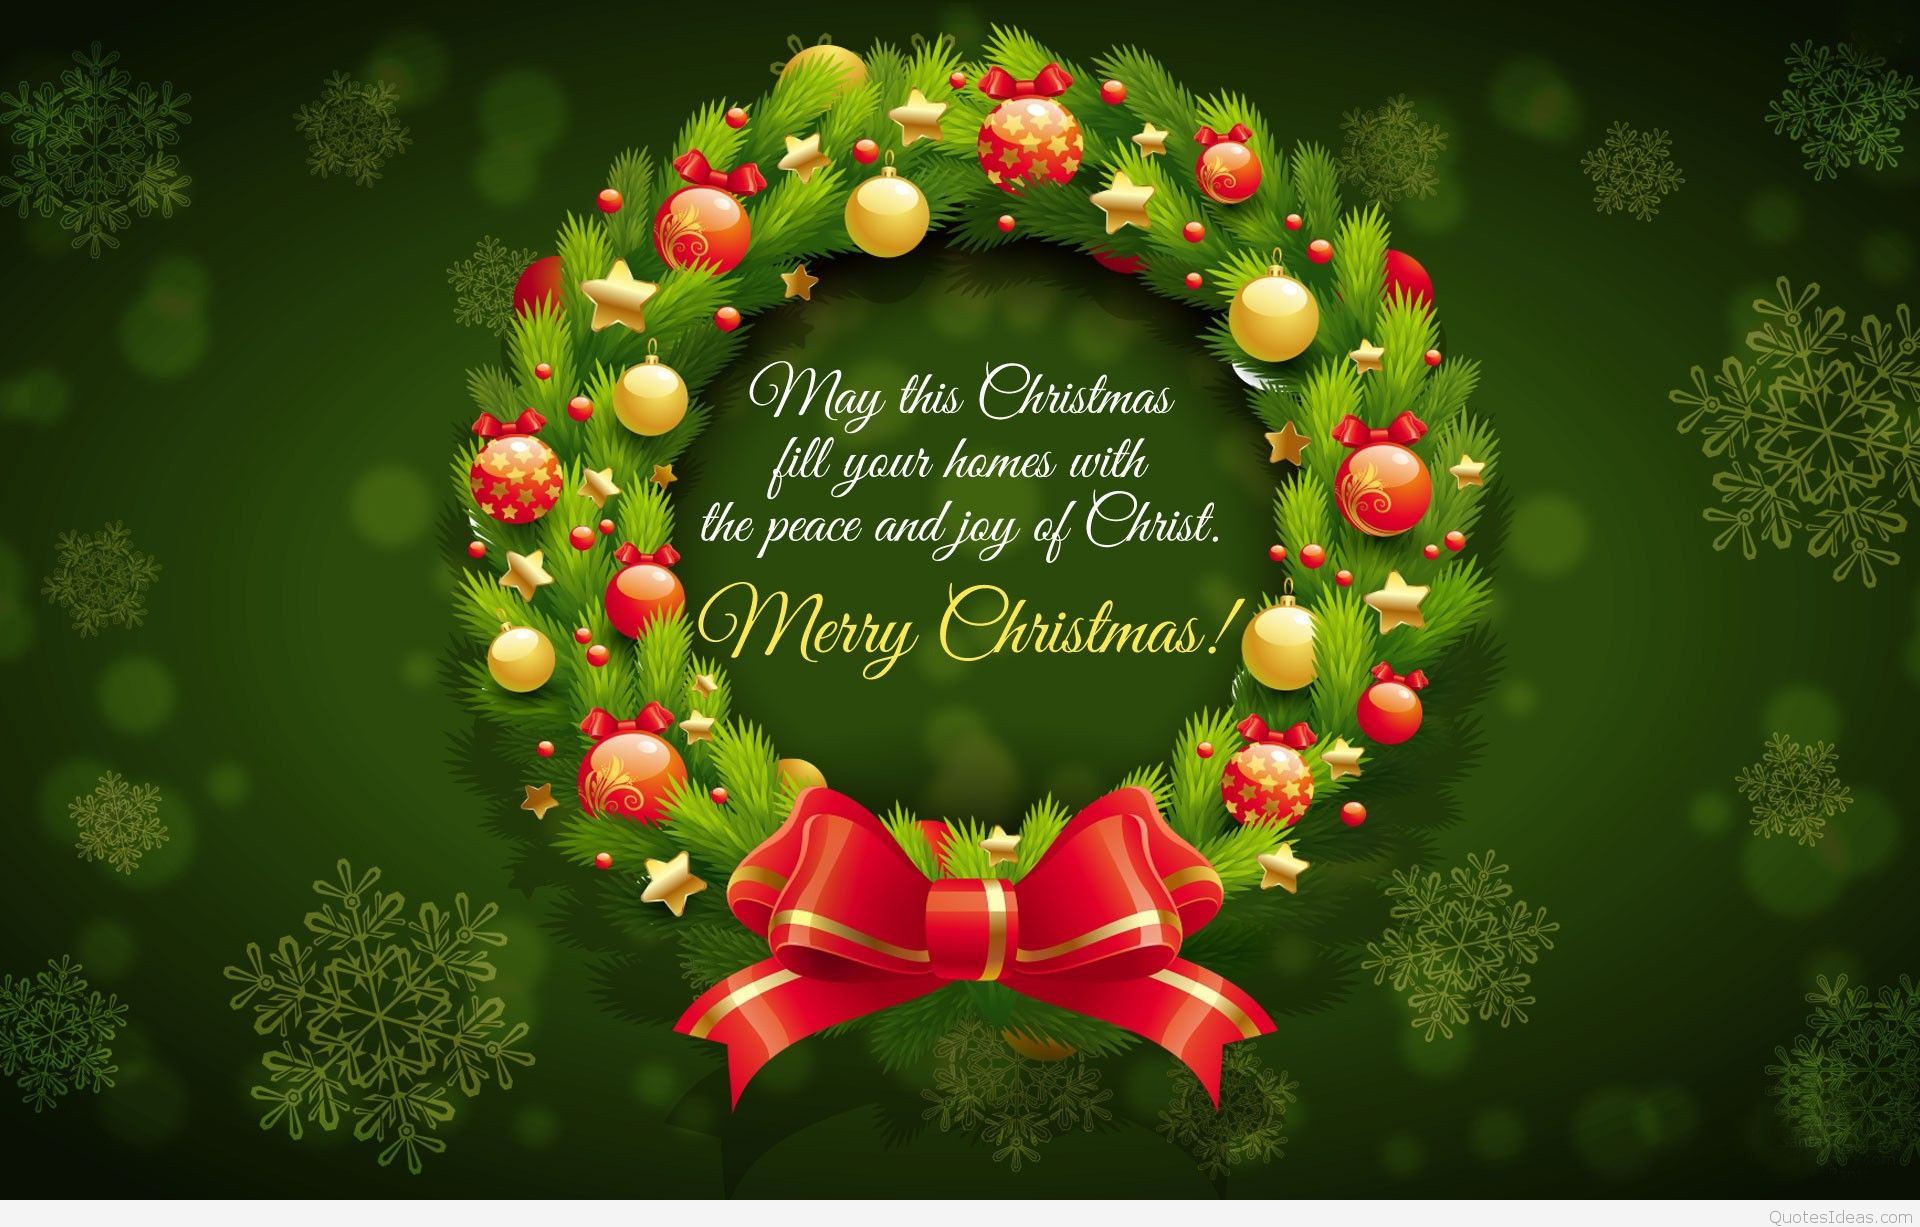 Merry Christmas Images And Quotes
 Merry Christmas Spiritual Religious quotes wishes 2015